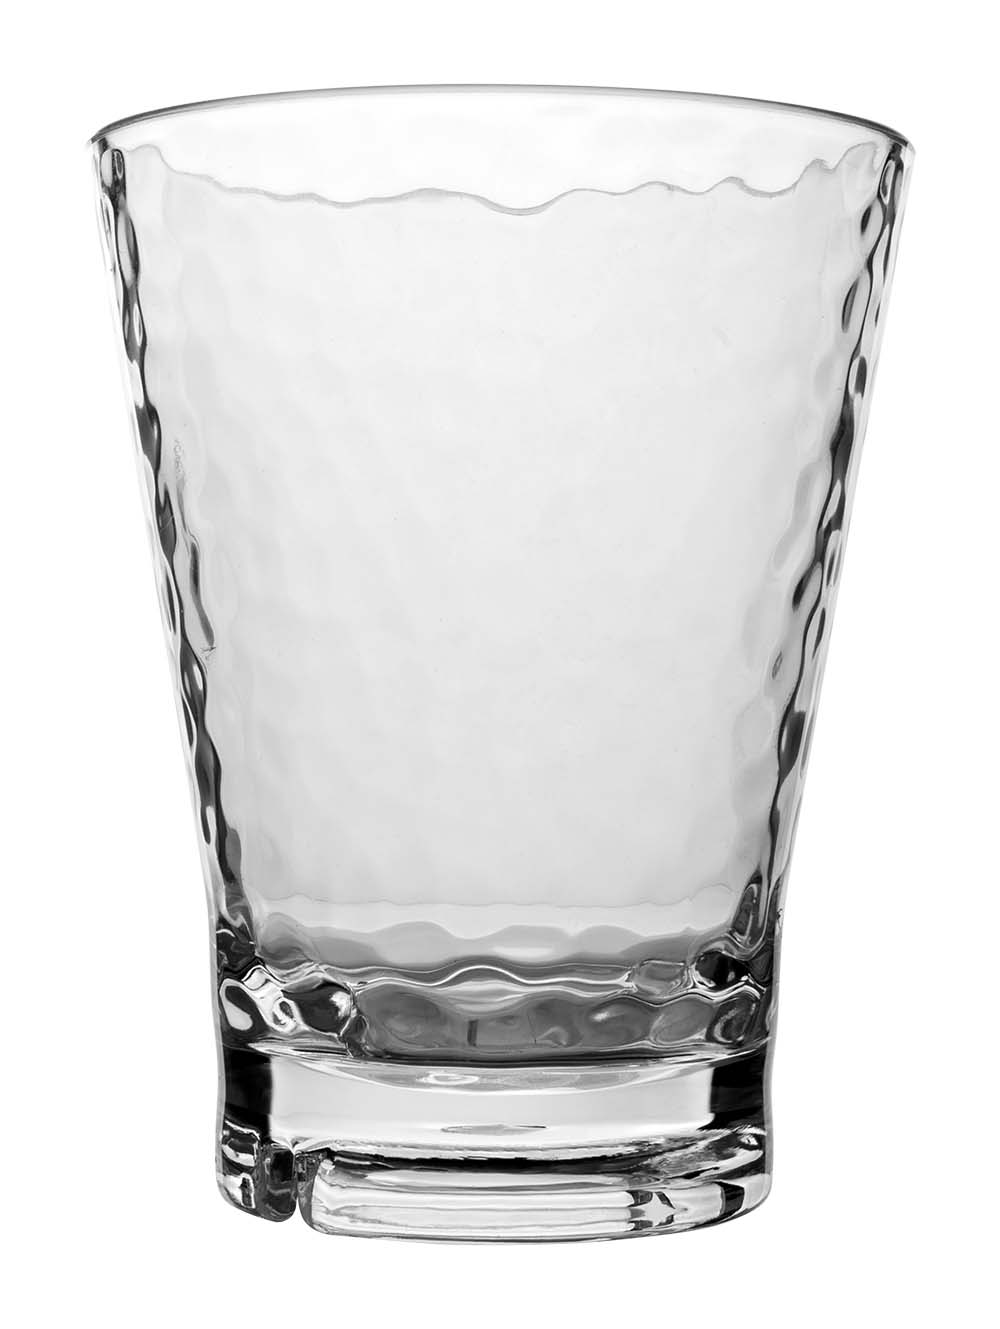 6101434 A modern lemonade glass with playful motif. The glass is made of very strong plastic and is BPA free. In addition, it is scratch resistant, lightweight and dishwasher safe.